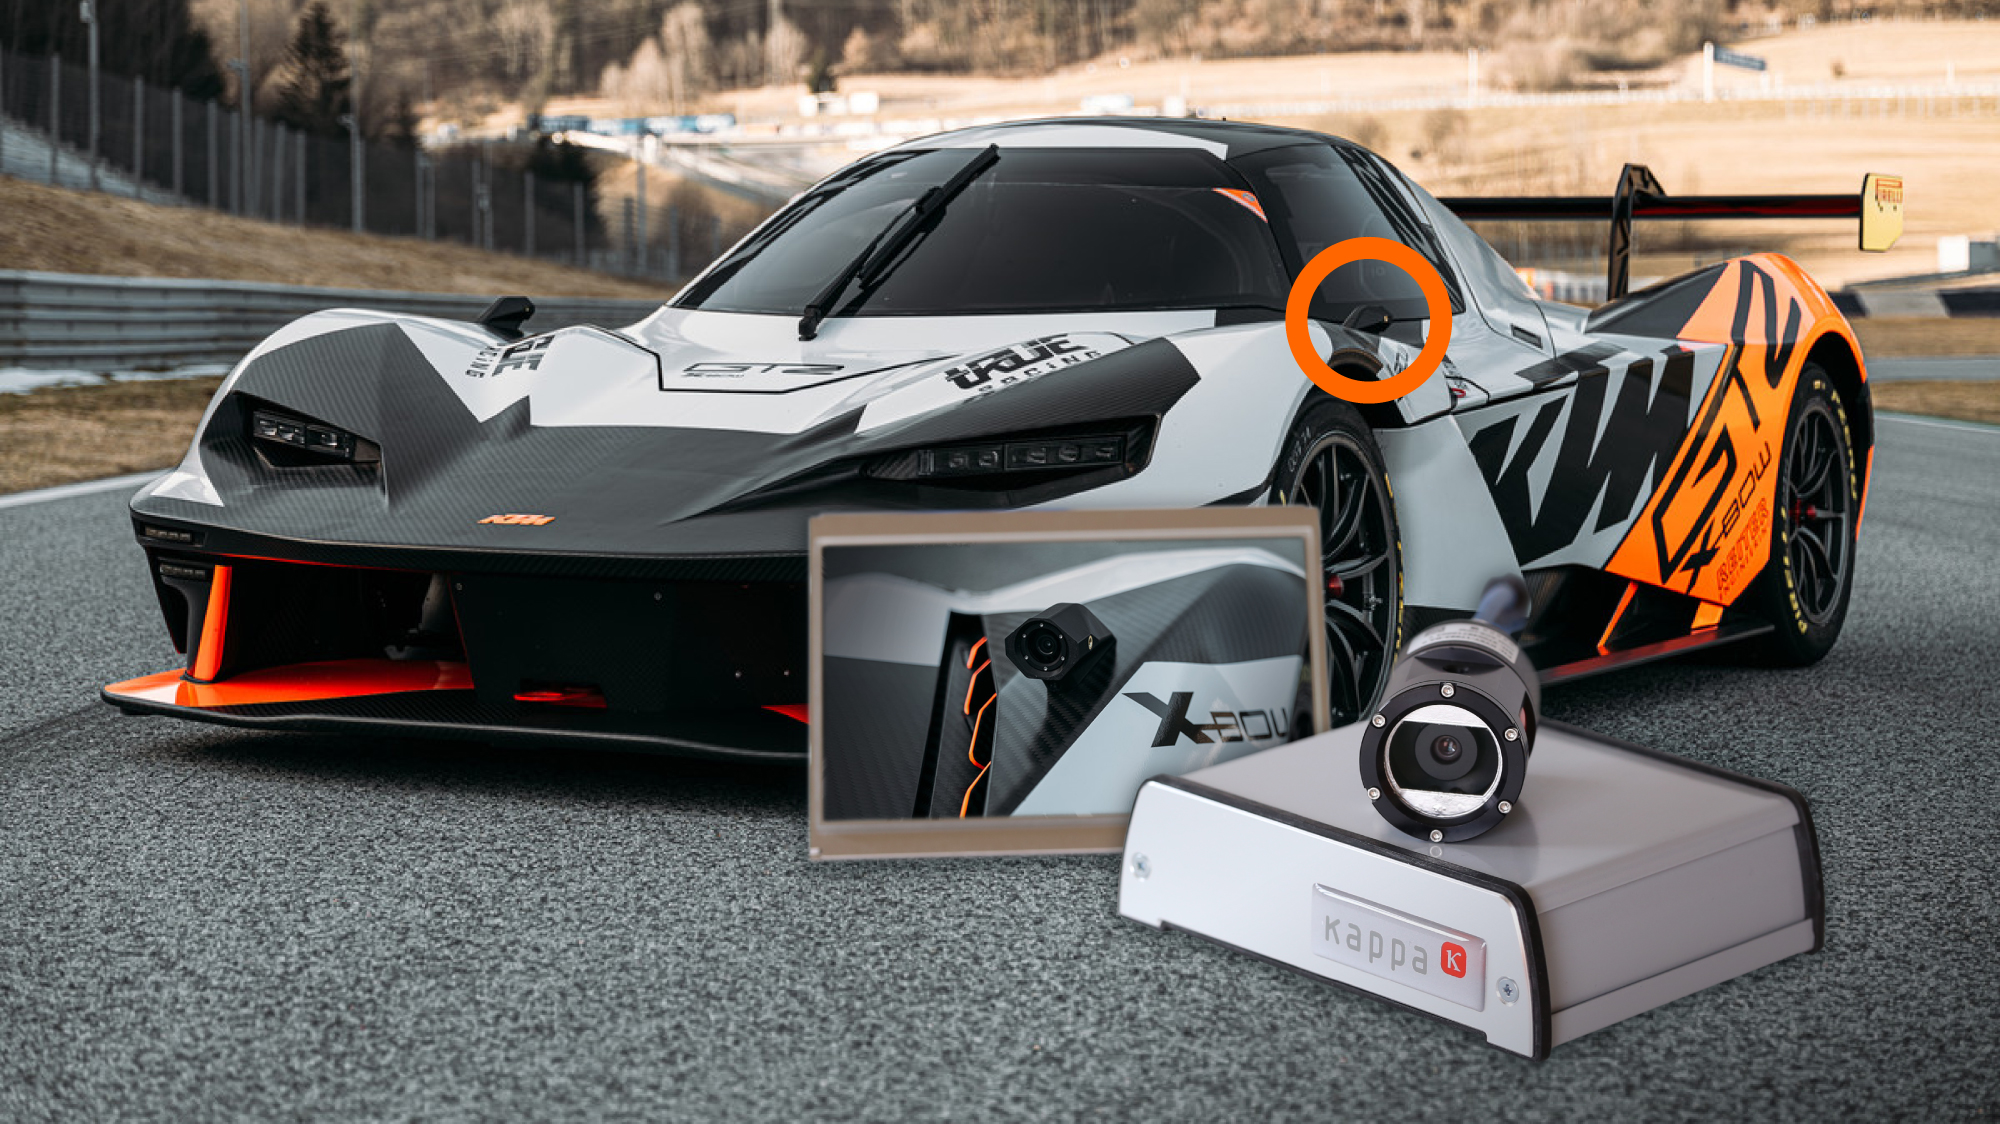 Innovative technology from Kappa optronics for KTM X-BOW super sports cars: Camera Vision Systems - application-specific certified ✓ for Aviation, Defense & Automotive ✓ 40 years experience ▻ Get info now!